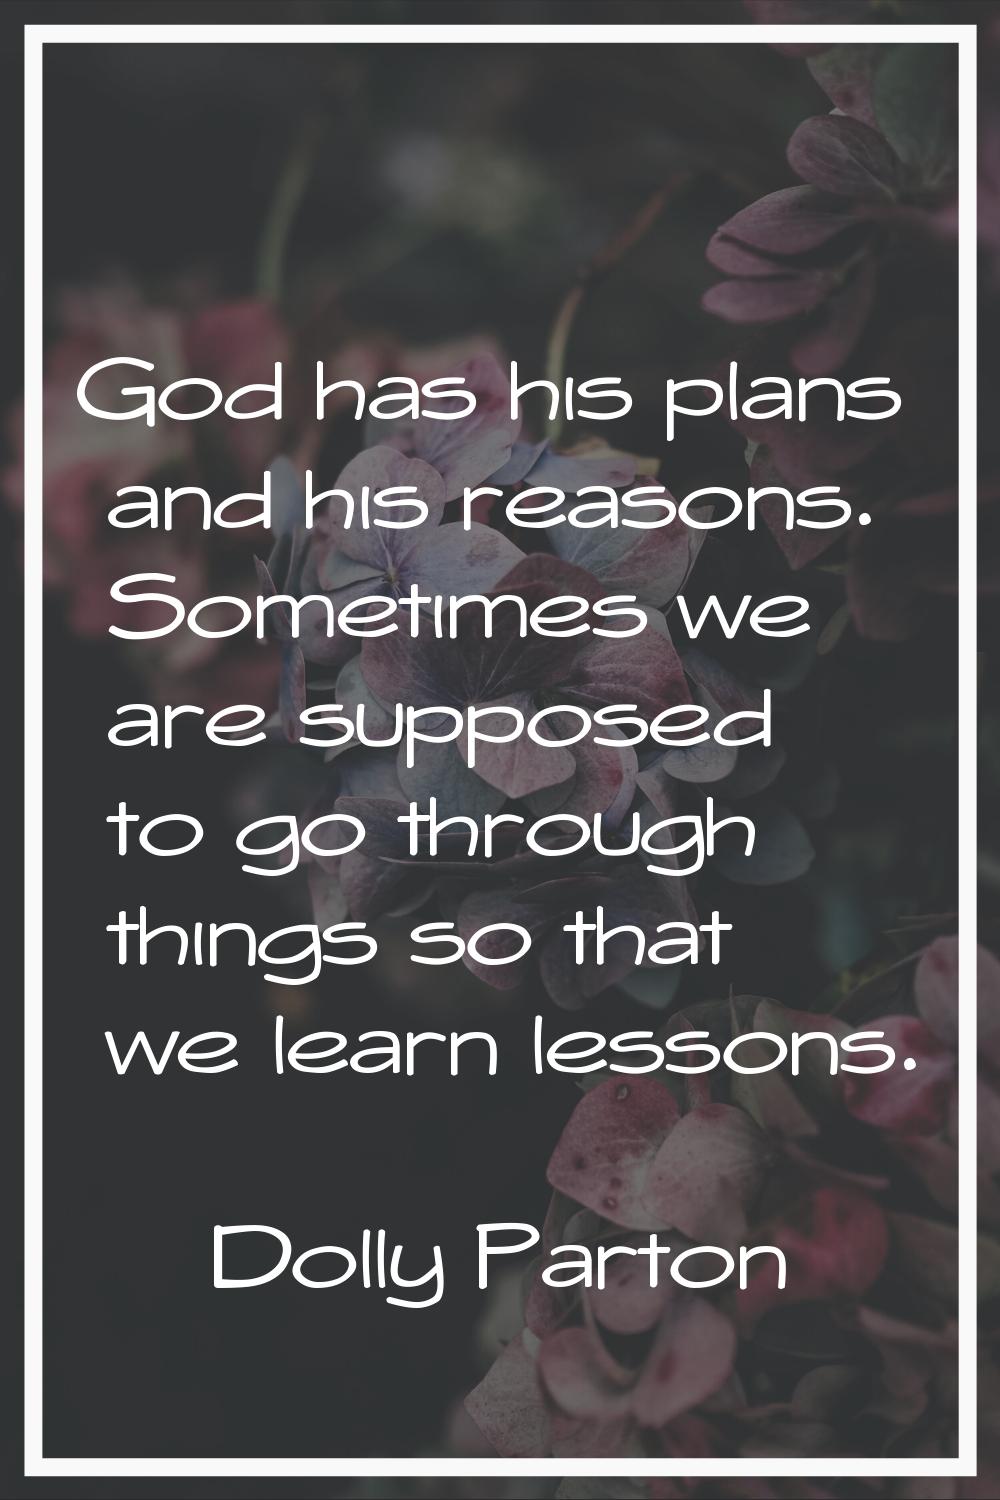 God has his plans and his reasons. Sometimes we are supposed to go through things so that we learn 